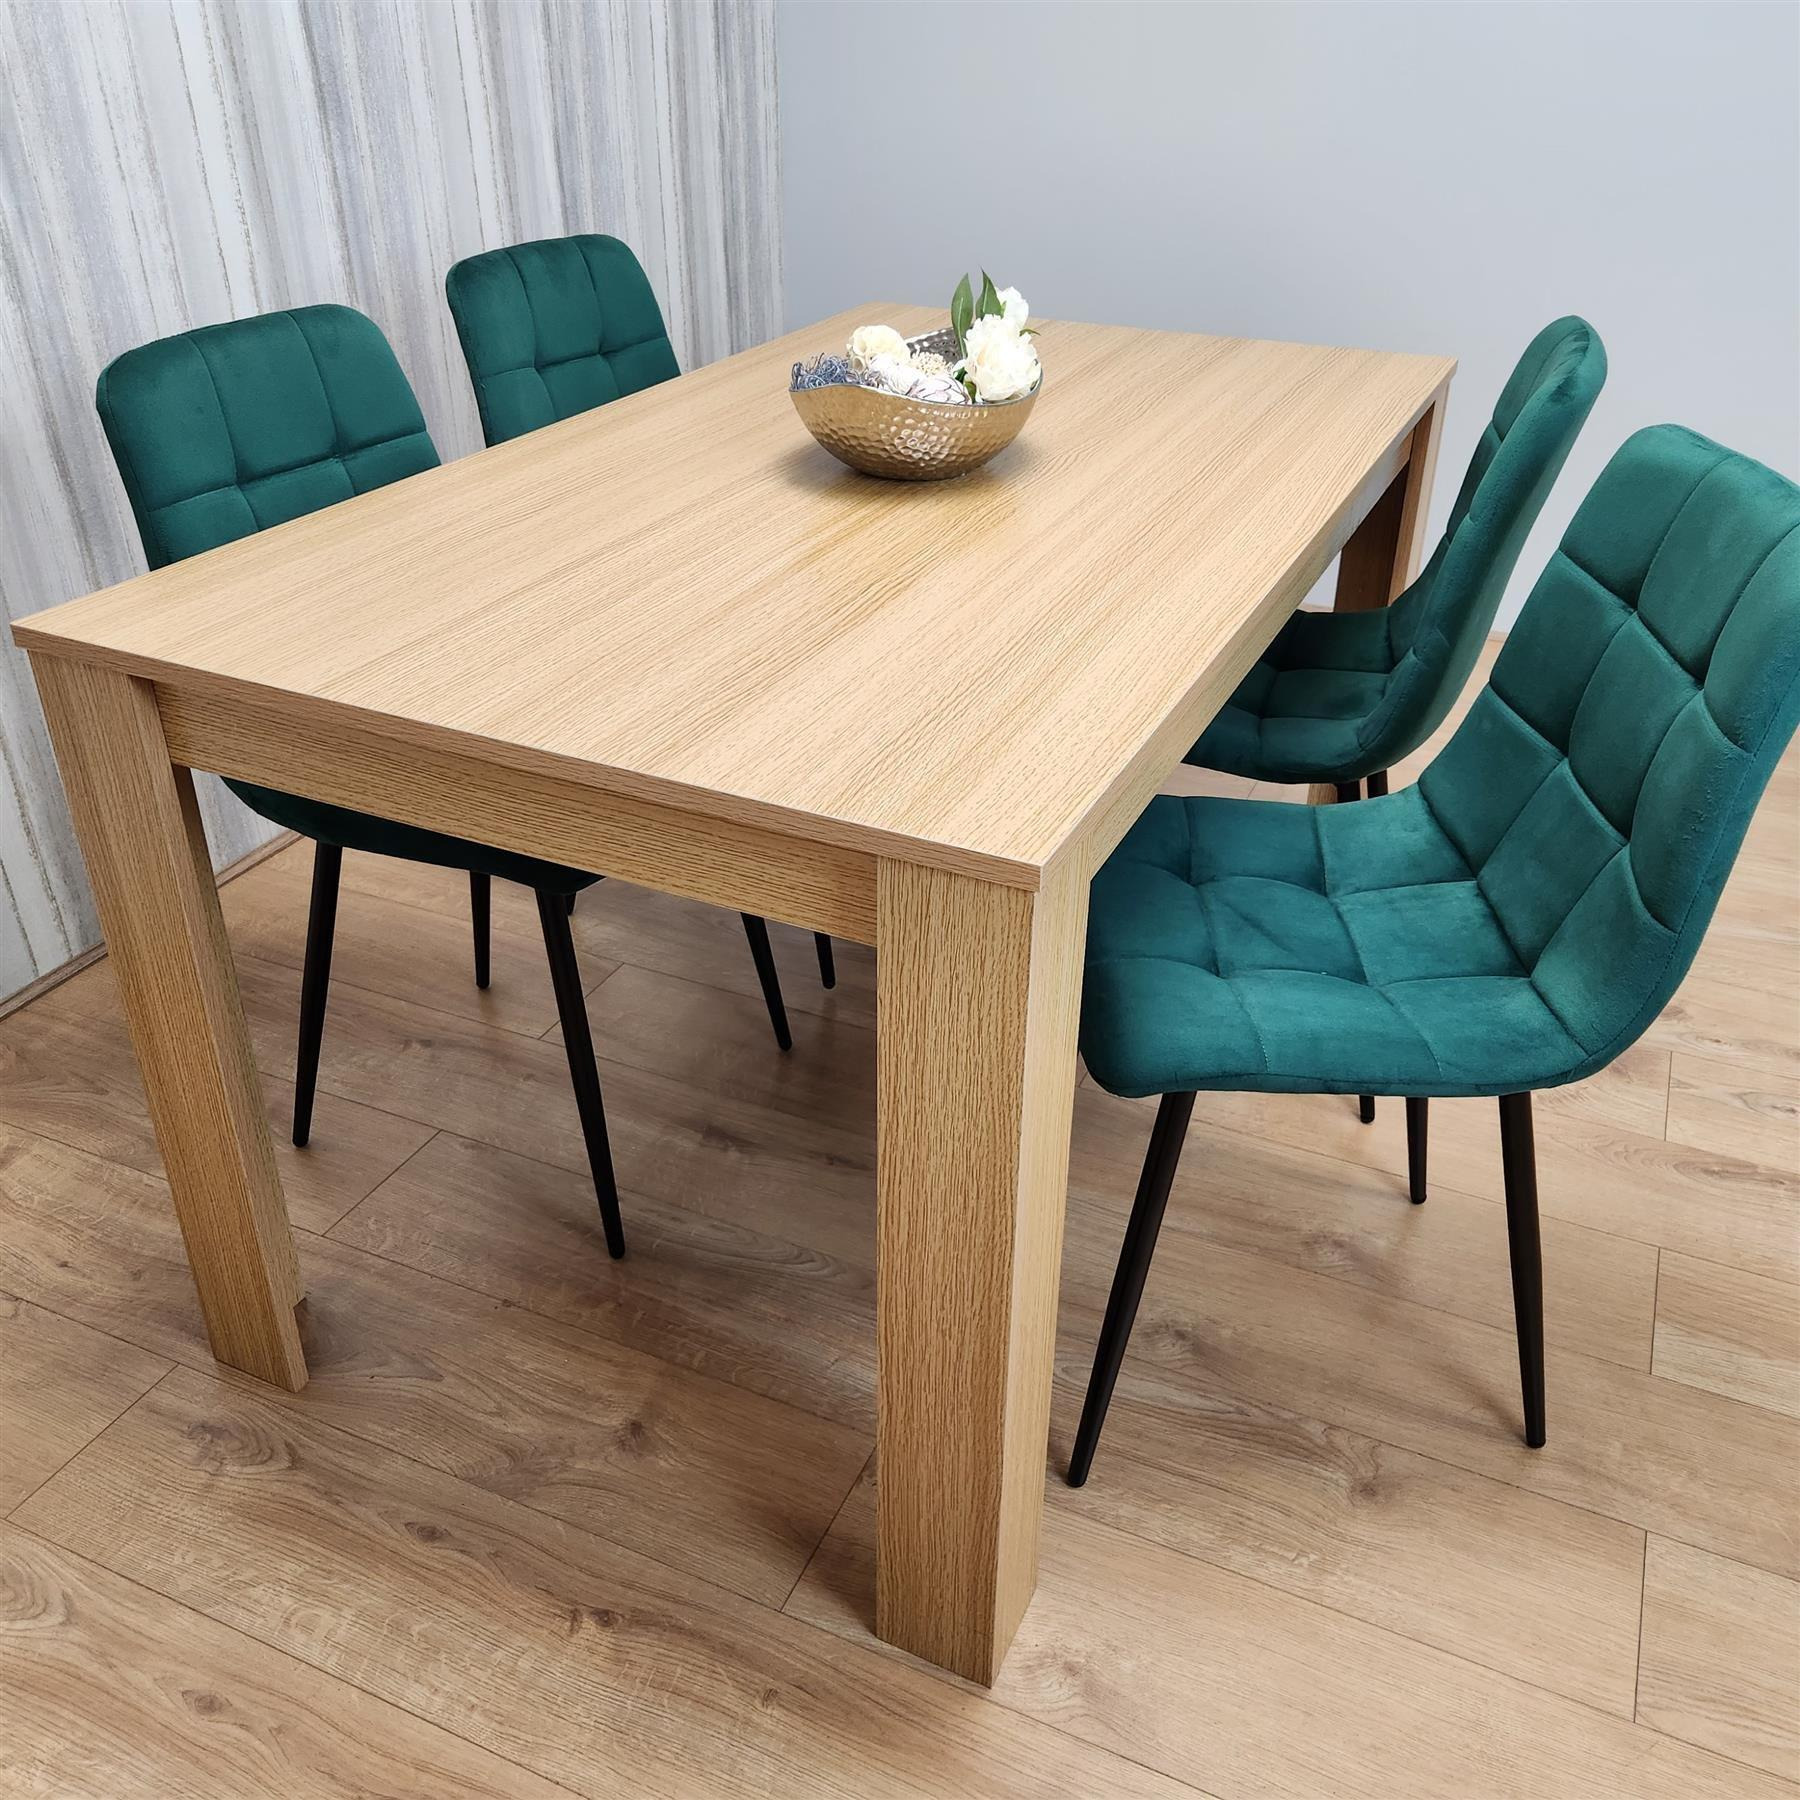 Dining Set of 4 Oak Effect Dining Table and 4 Green Velvet Chairs Dining Room Furniture - image 1